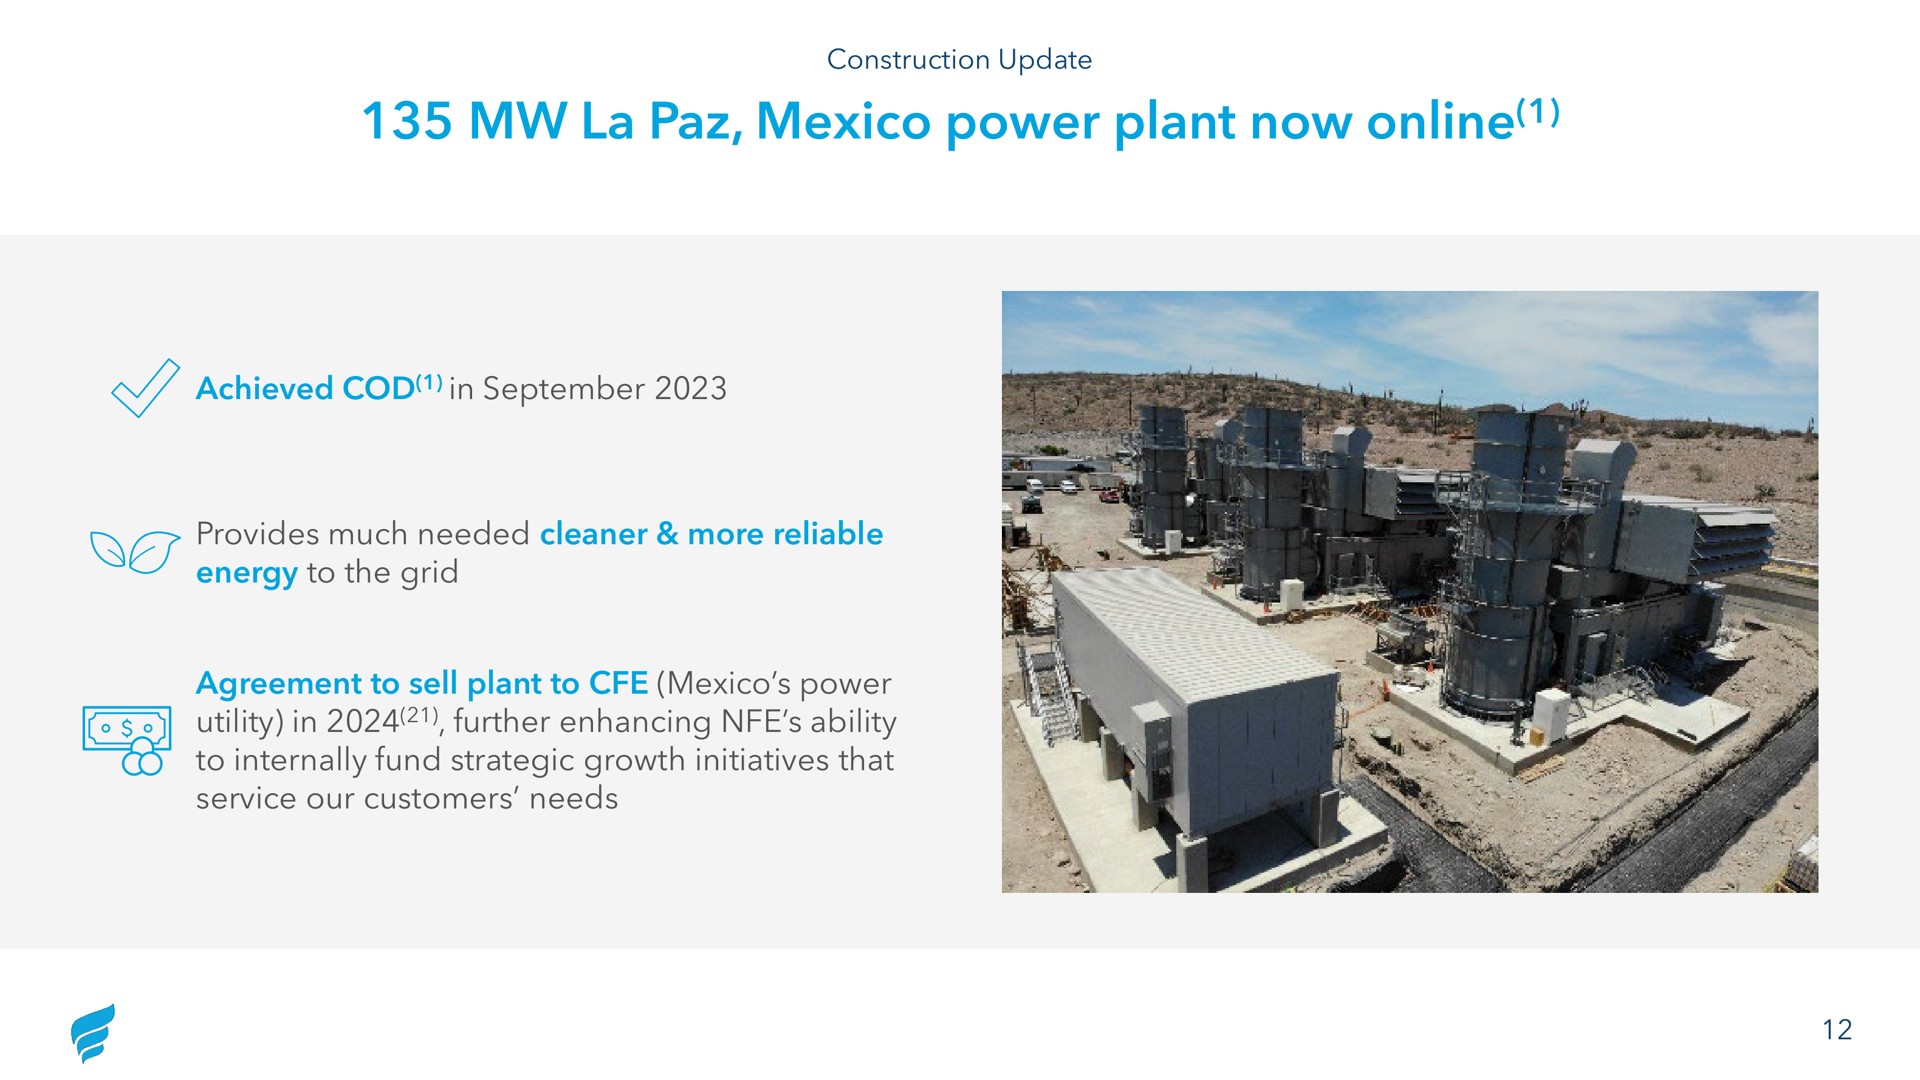 power plant now achieved cod in provides much needed cleaner more reliable energy to the grid agreement to sell plant to power utility in further enhancing ability to internally fund strategic growth initiatives that service our customers needs | NewFortress Energy